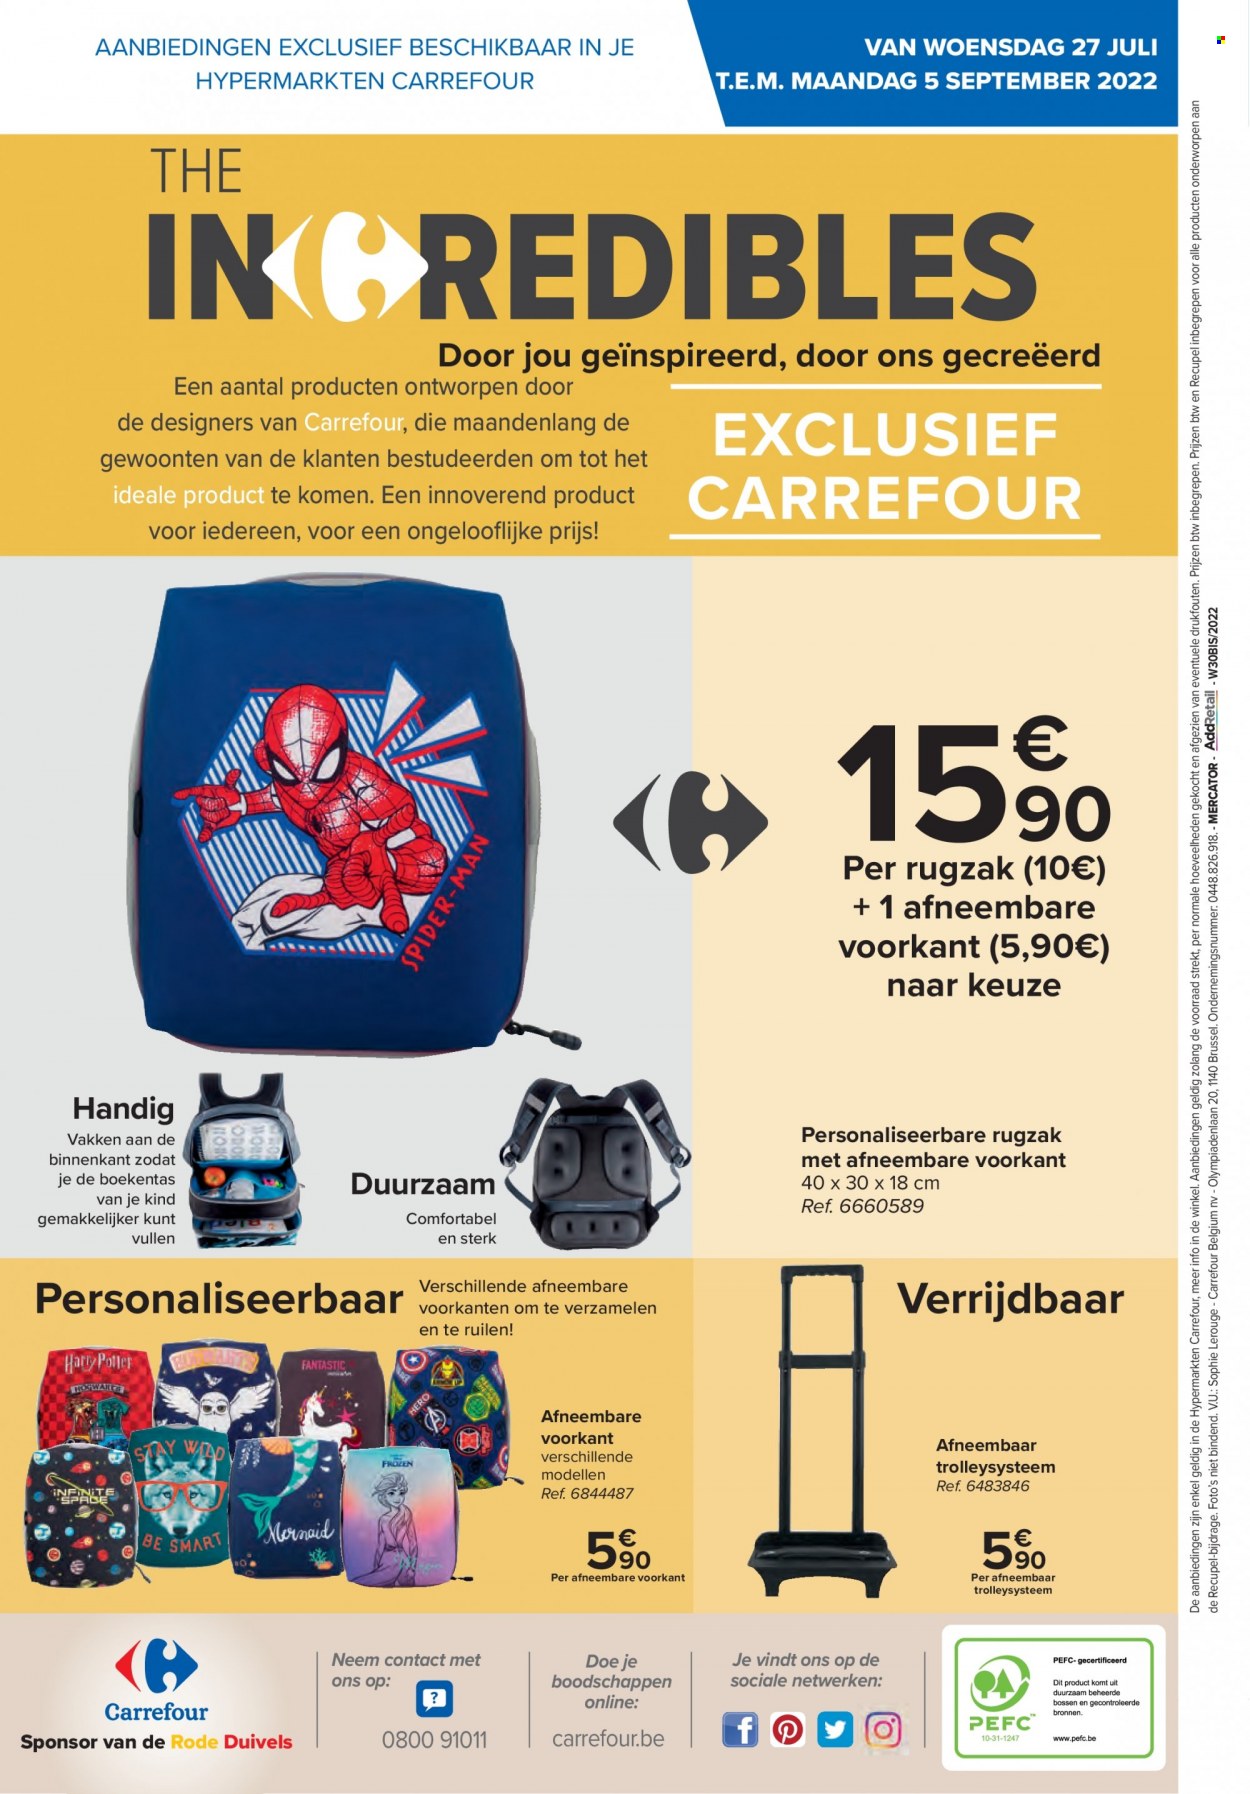 Catalogue Carrefour hypermarkt - 27.7.2022 - 5.9.2022. Page 32.